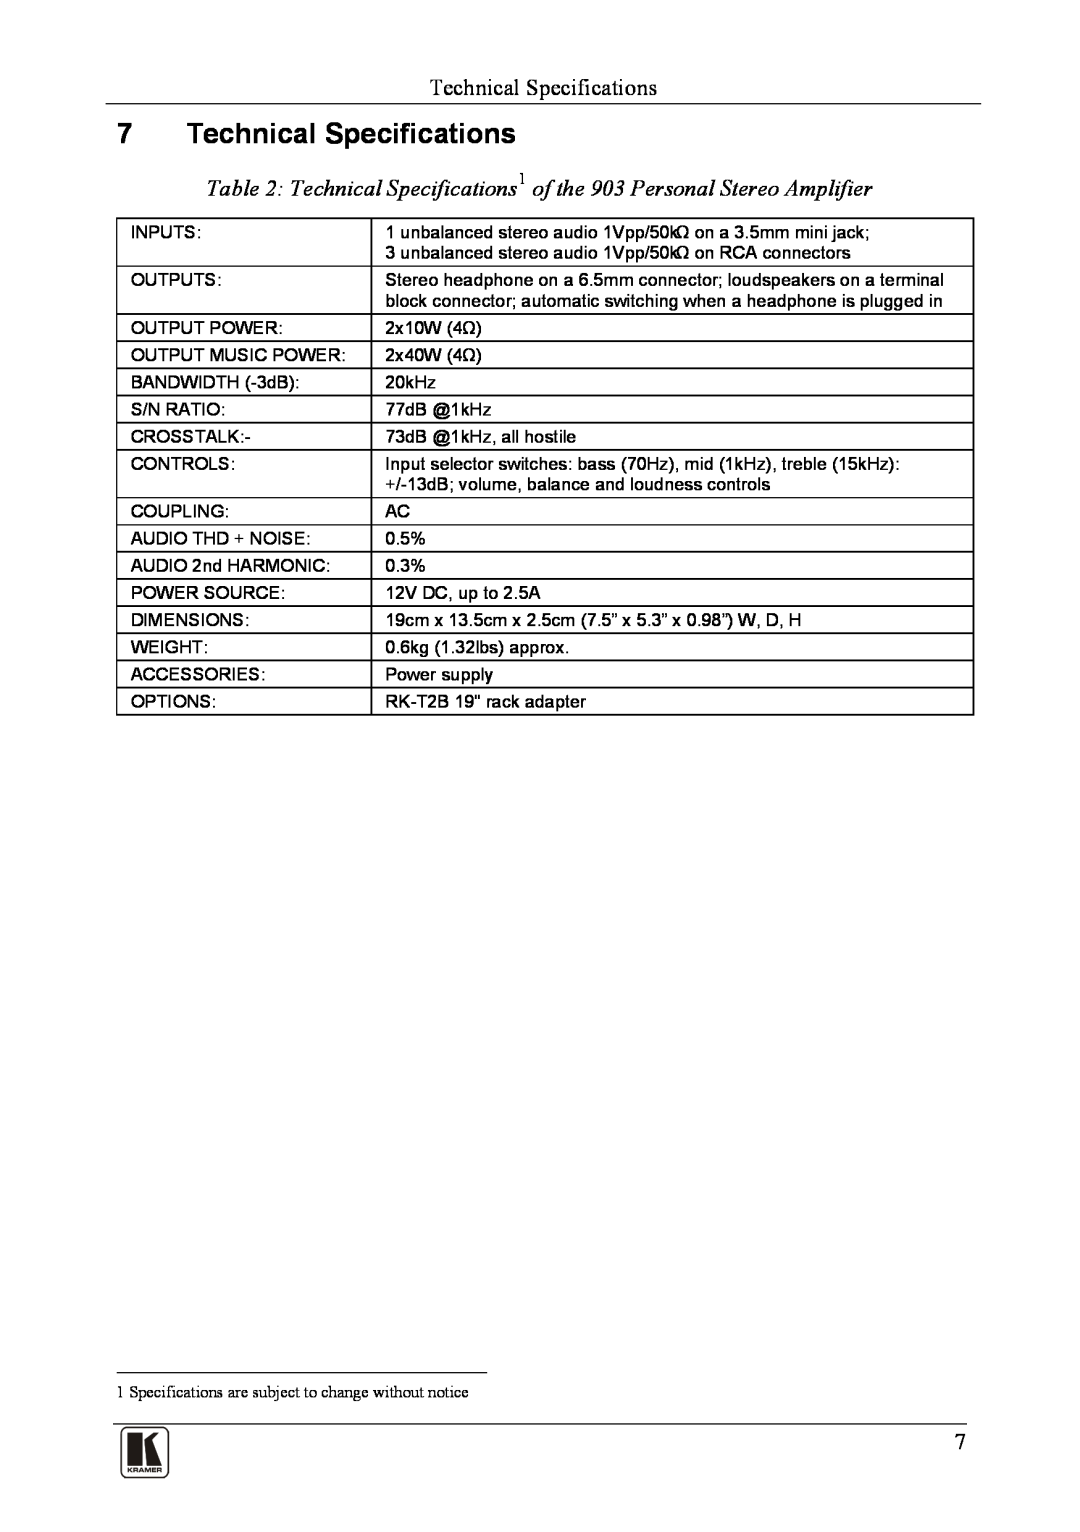 Kramer Electronics 903 user manual Technical Specifications 